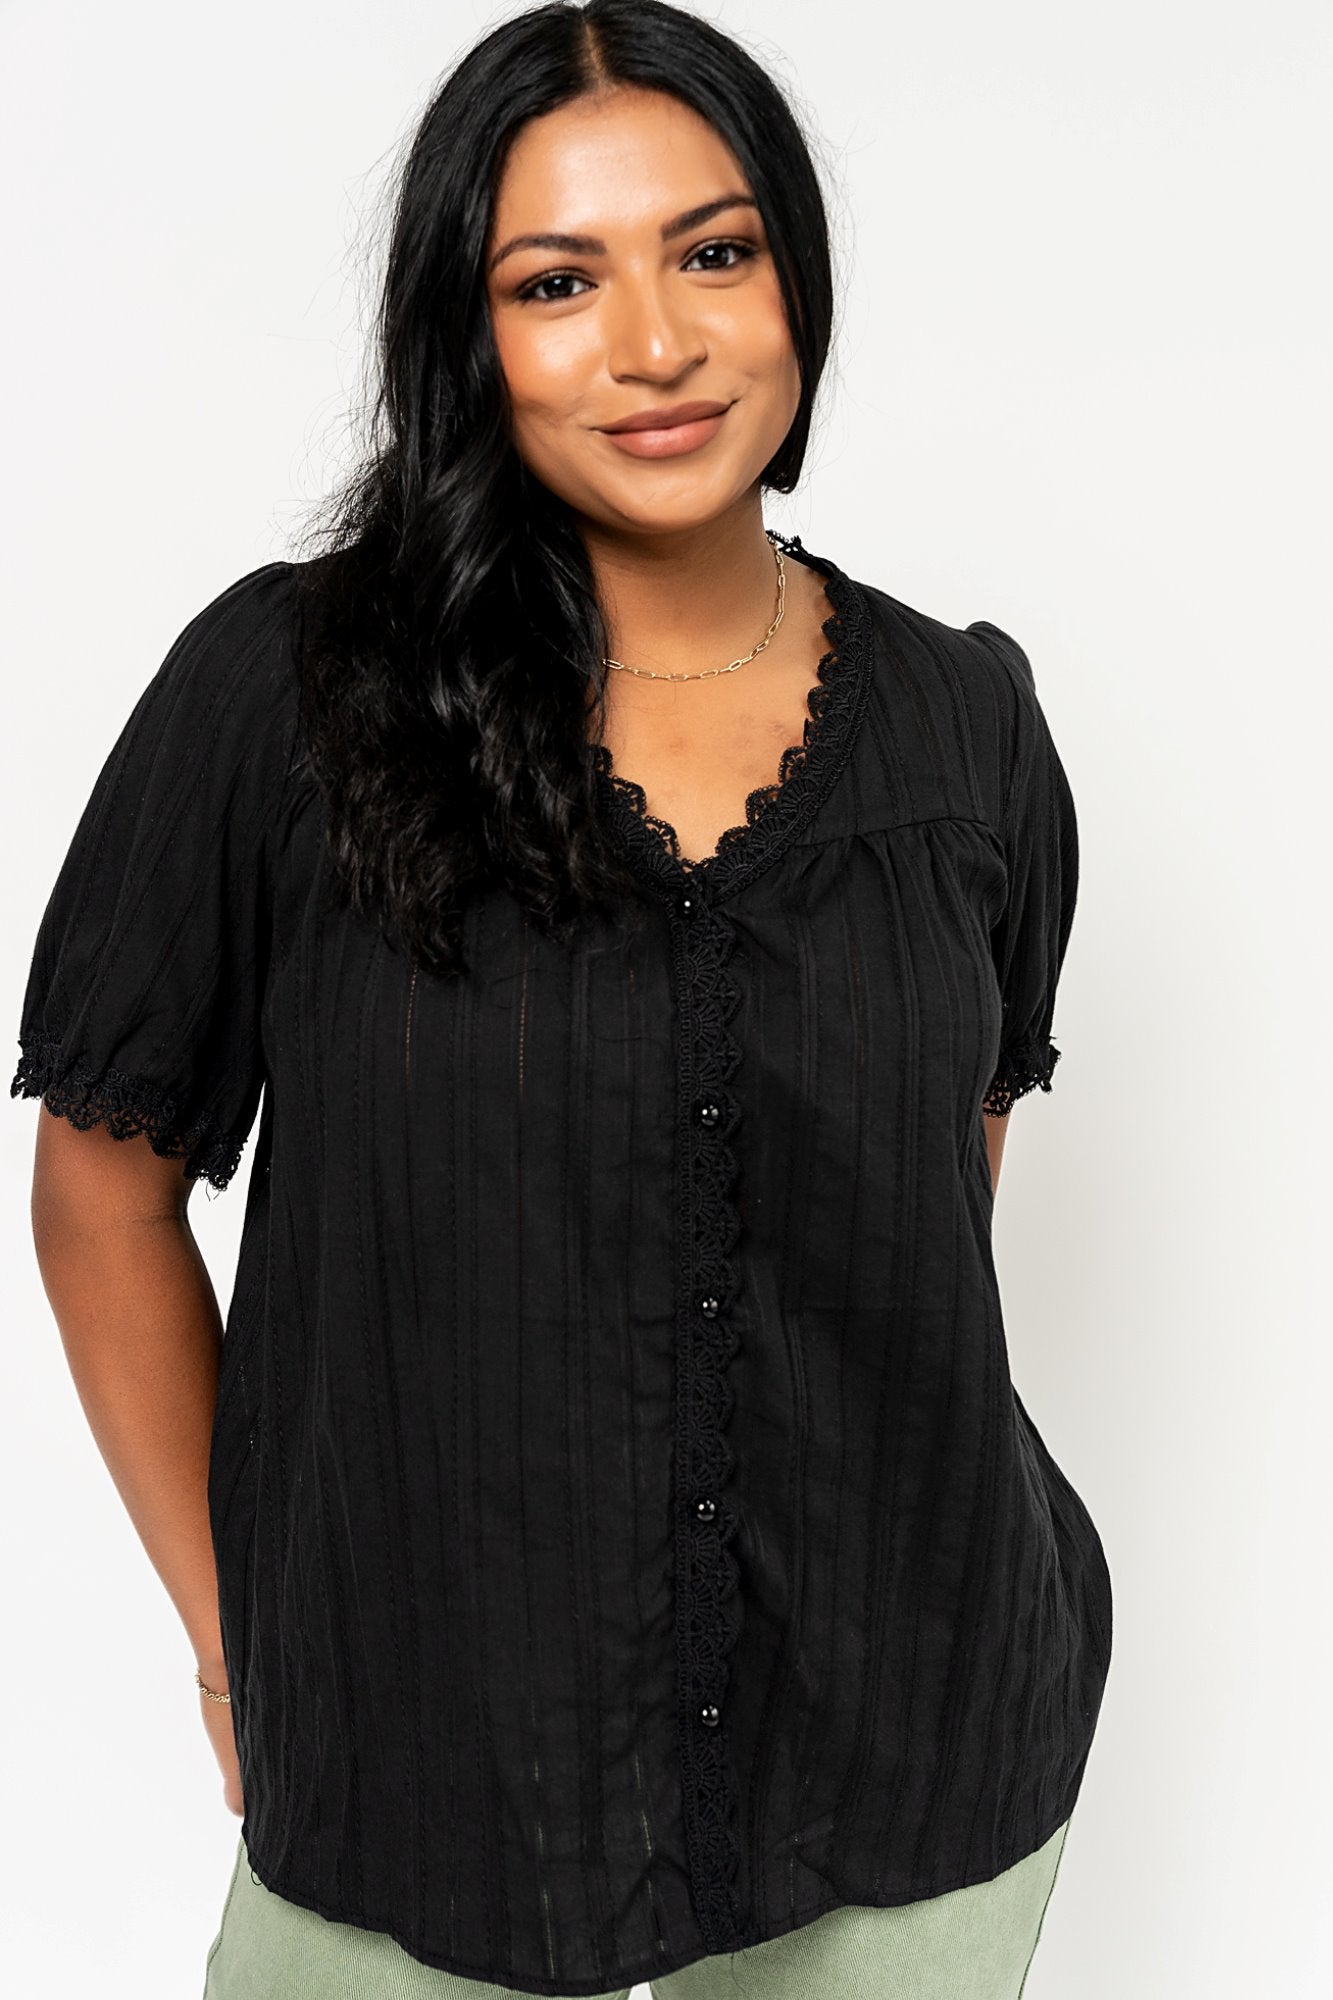 Harmony Top in Black Holley Girl 